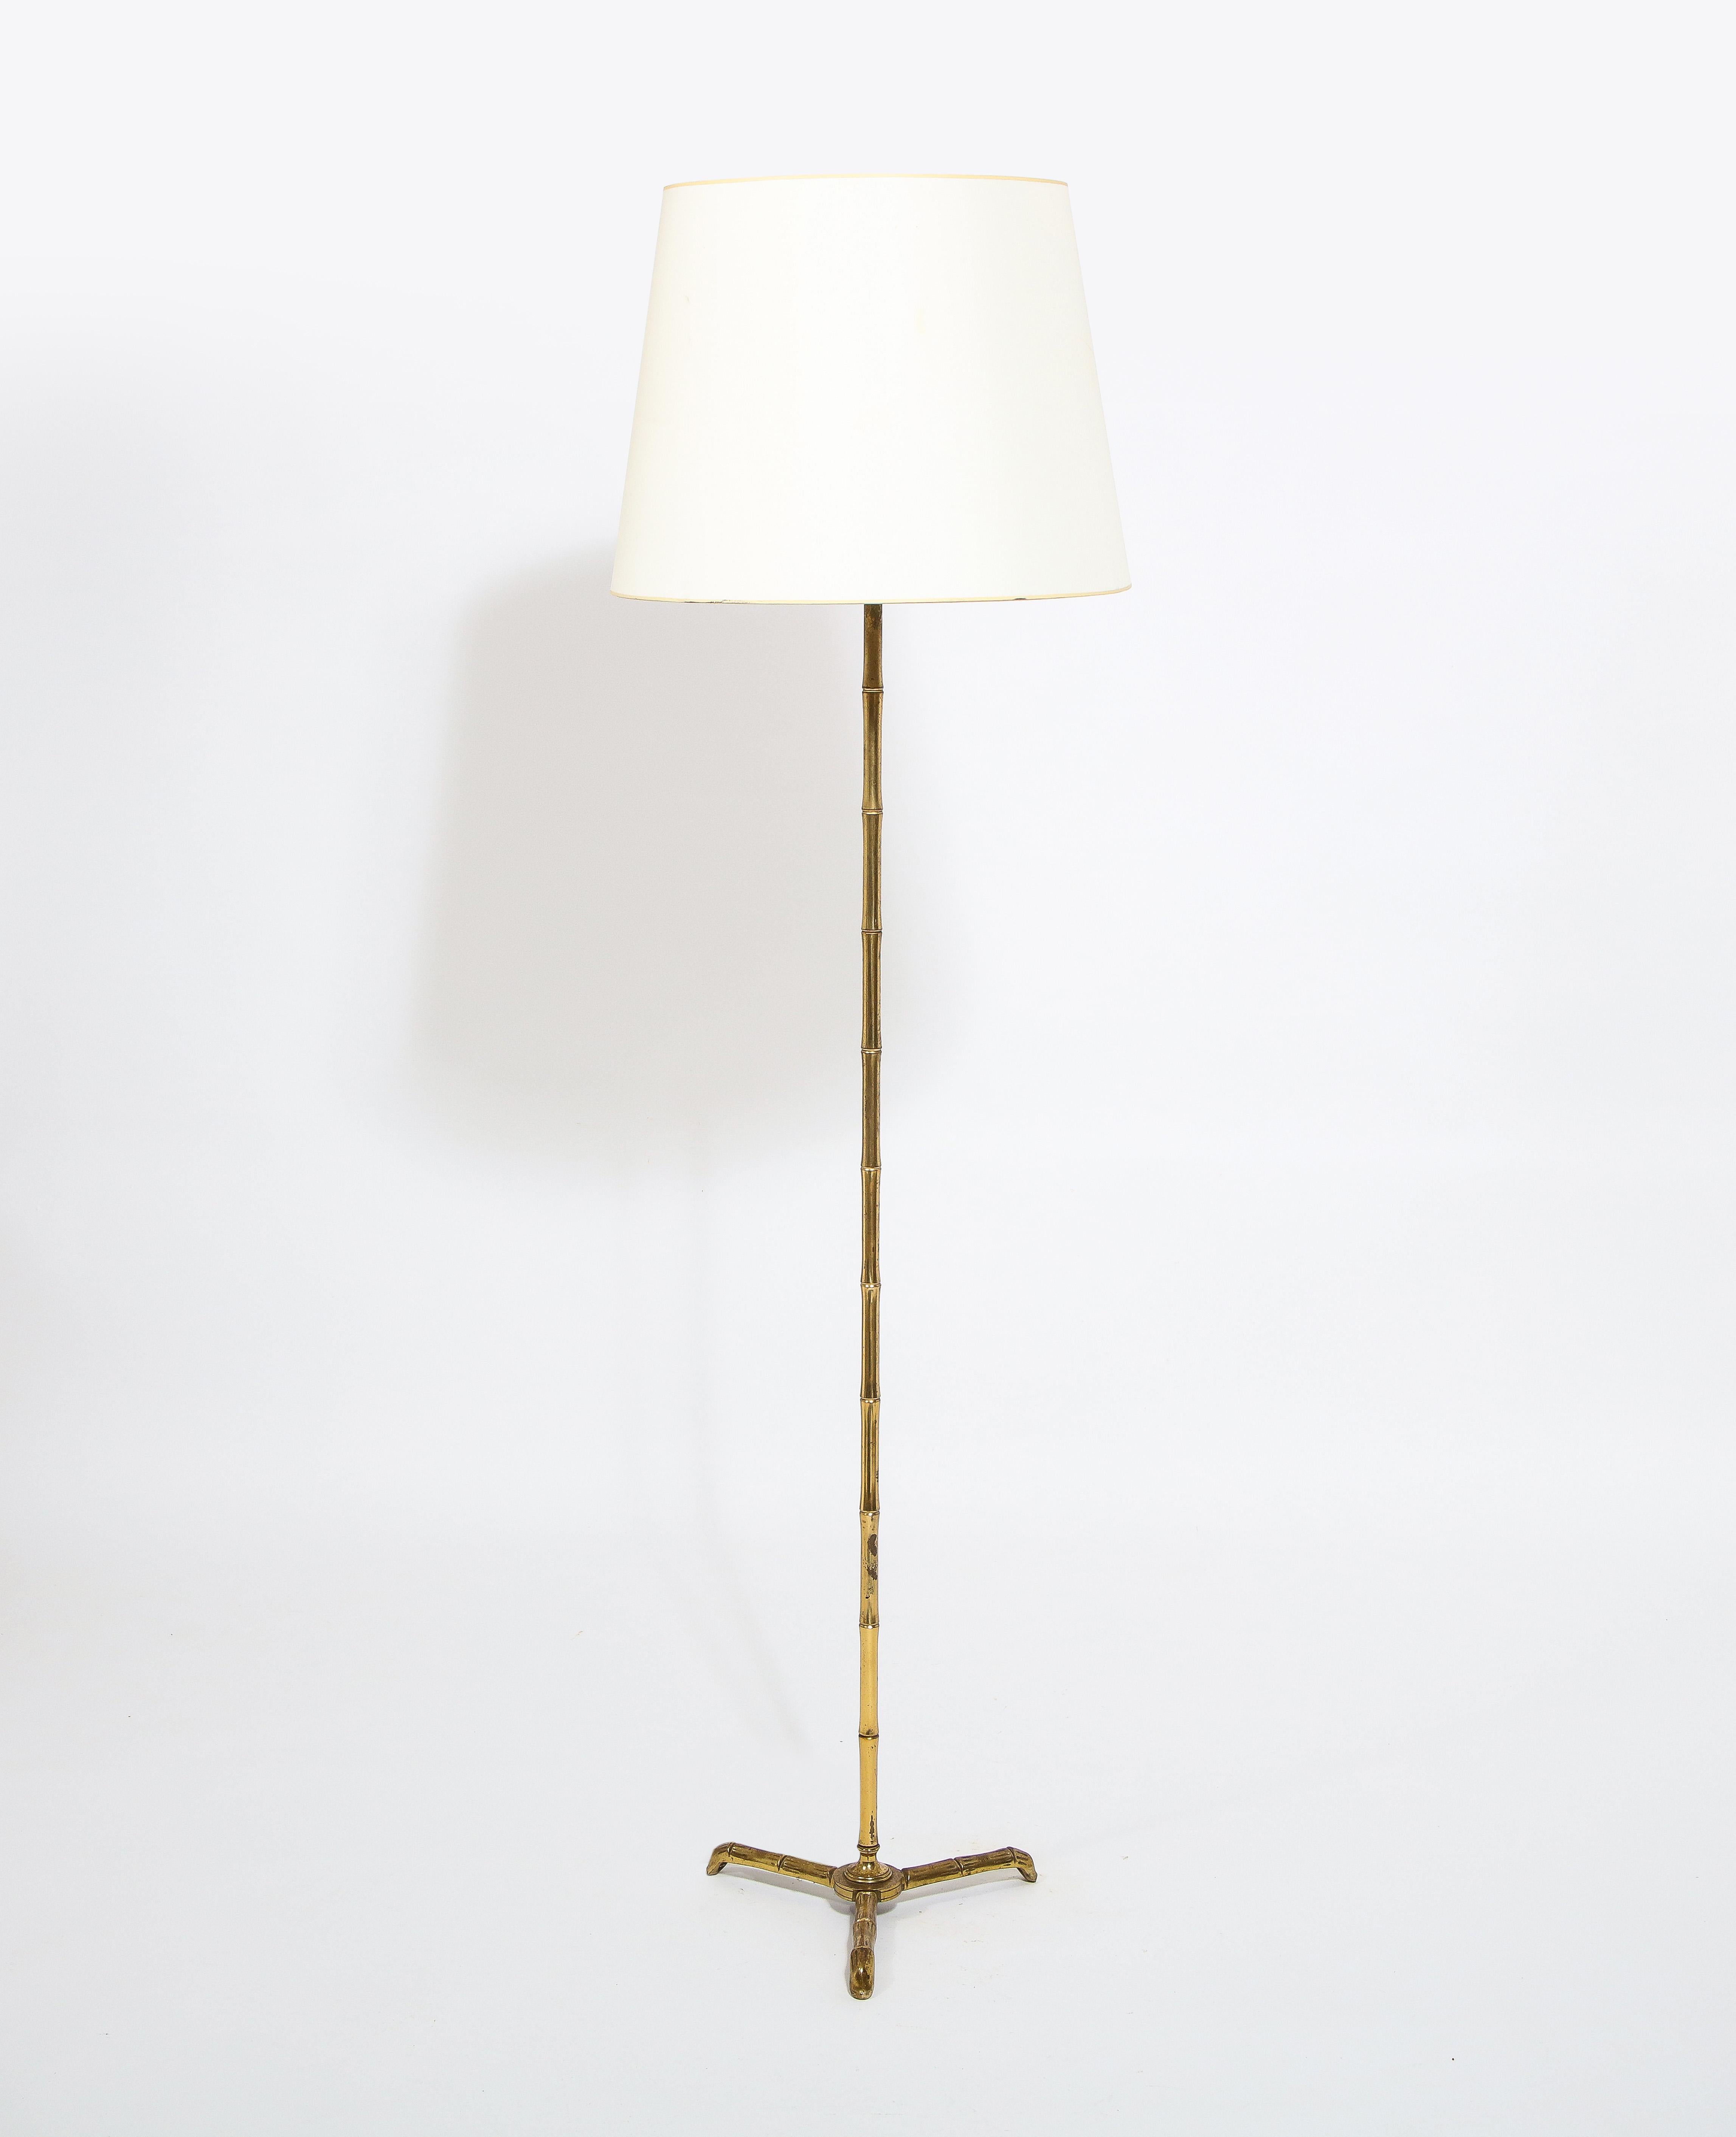 A cast brass faux bamboo lamp with a very nice texture and patina. Shade is for photographic purposes only.